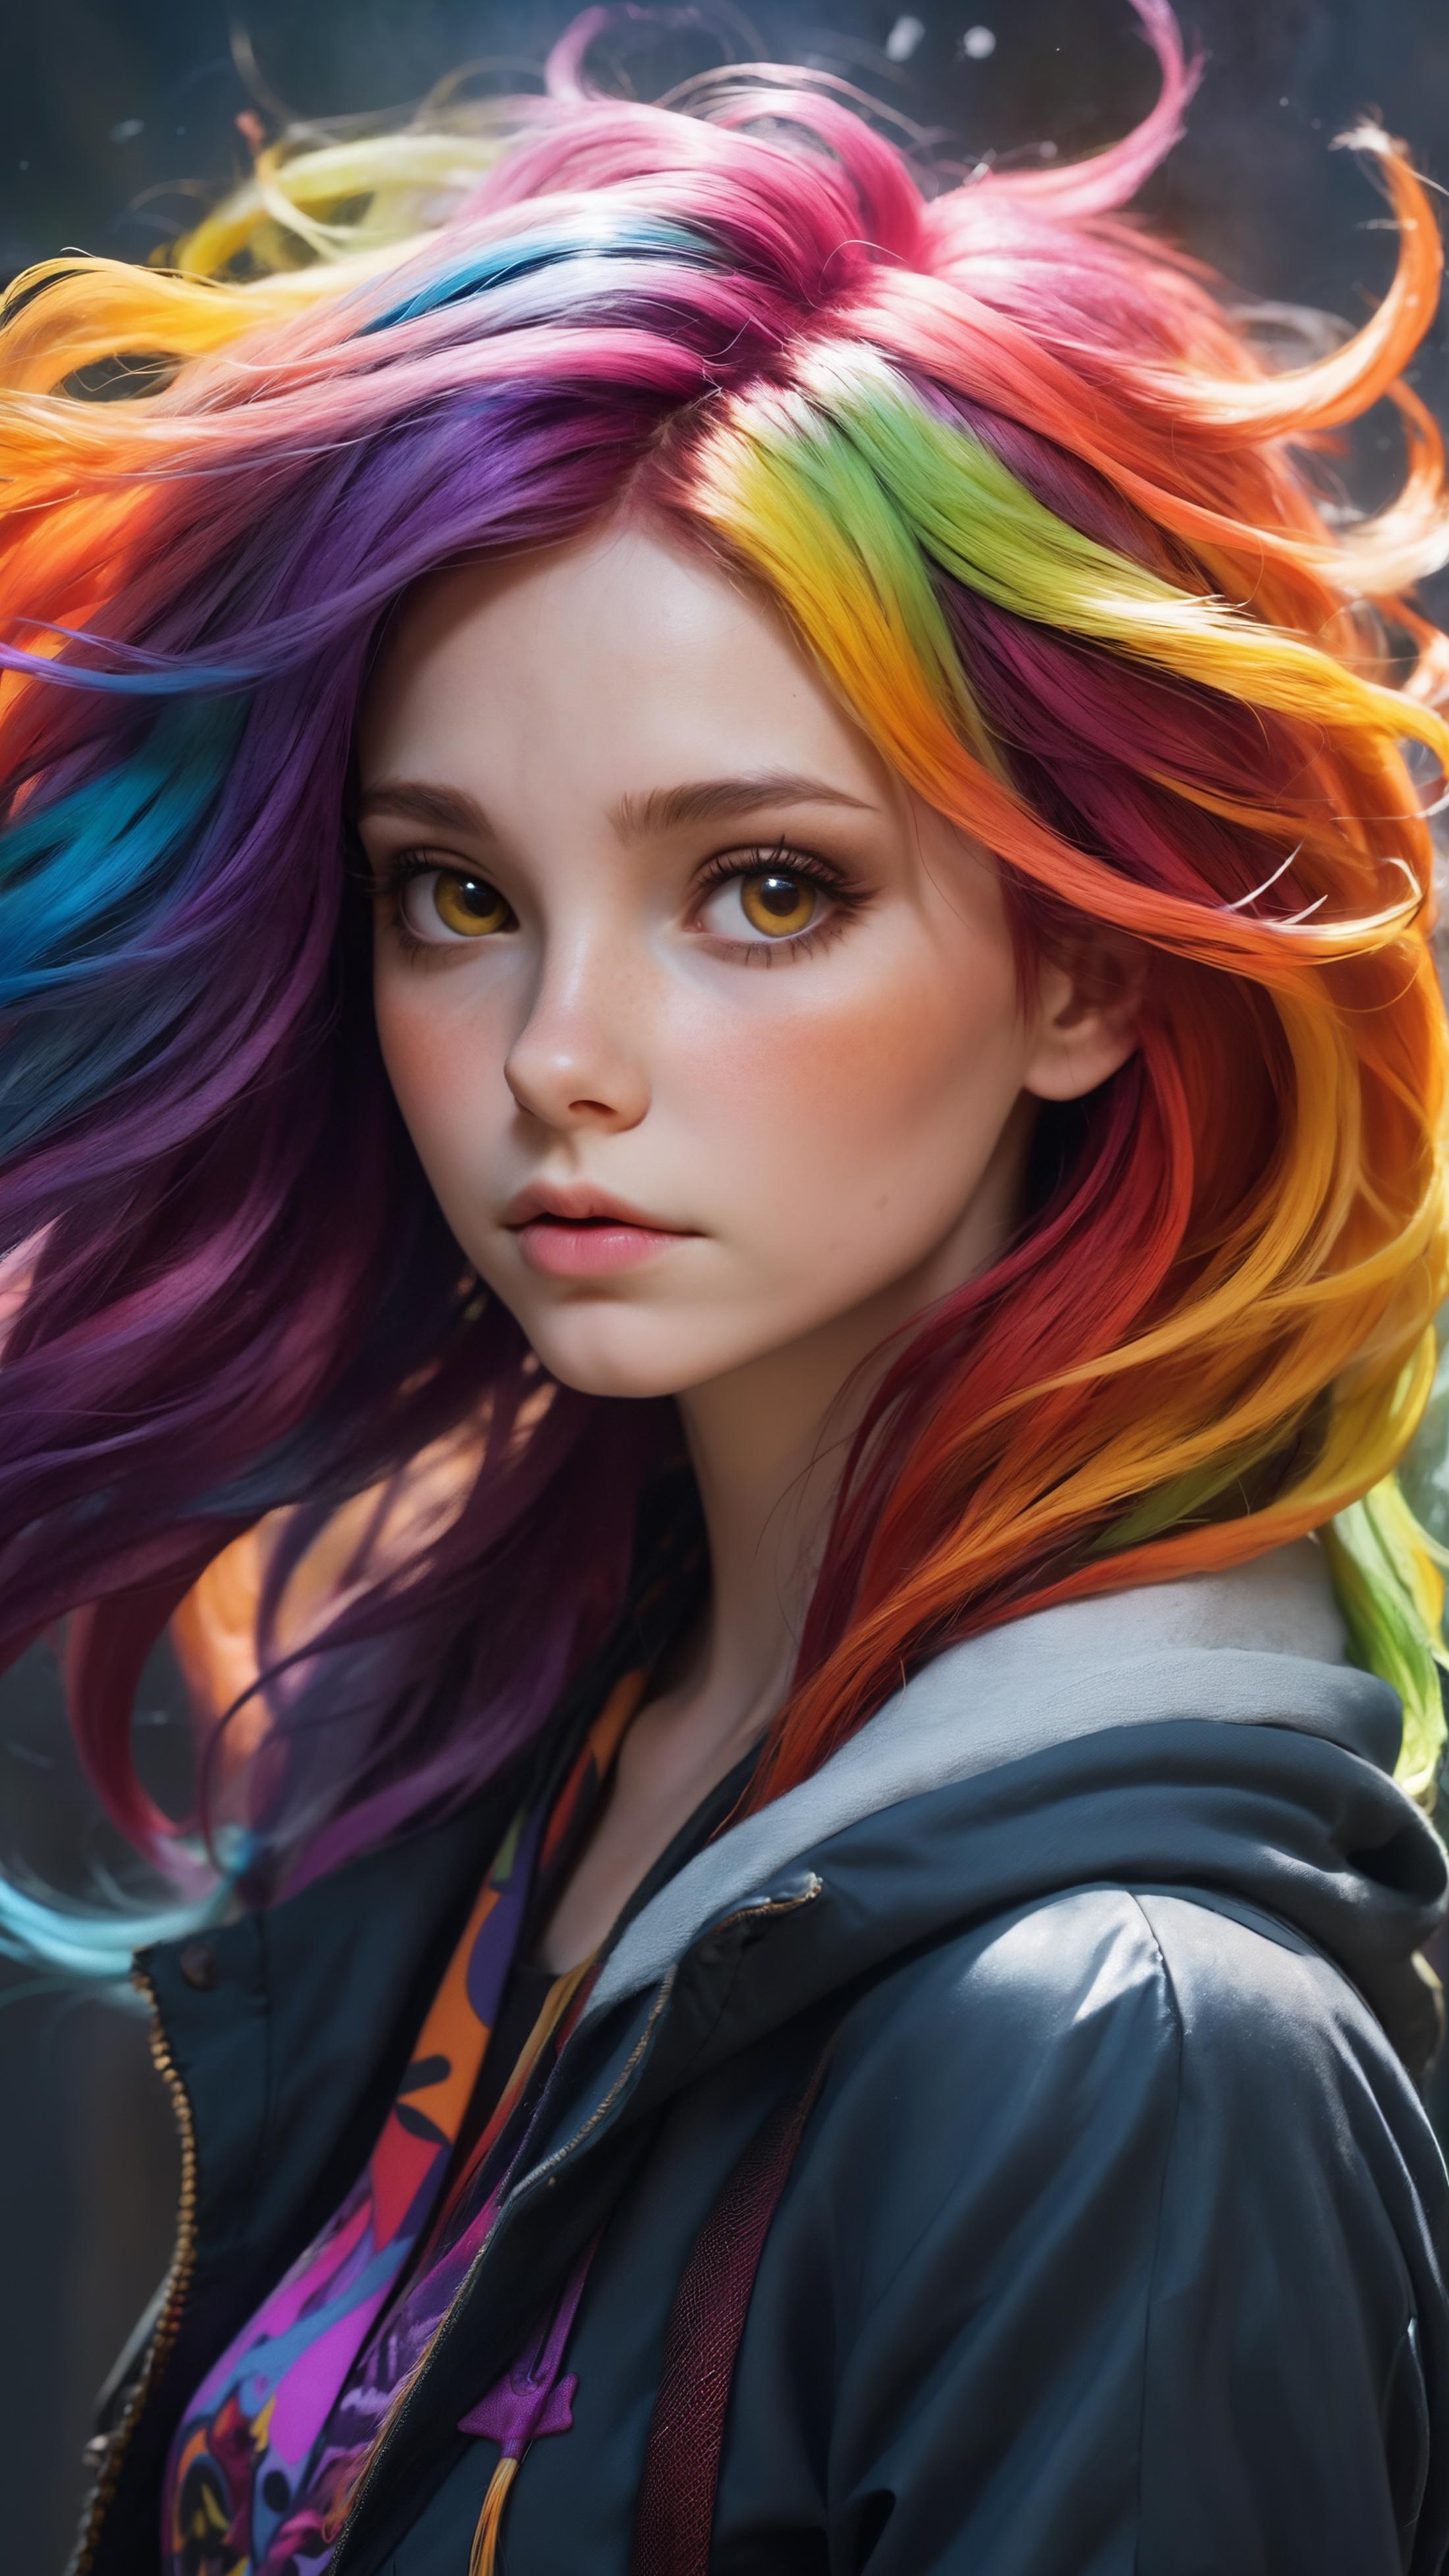 A beautiful young woman with vibrant rainbow hair, wearing a jacket and looking at the camera.